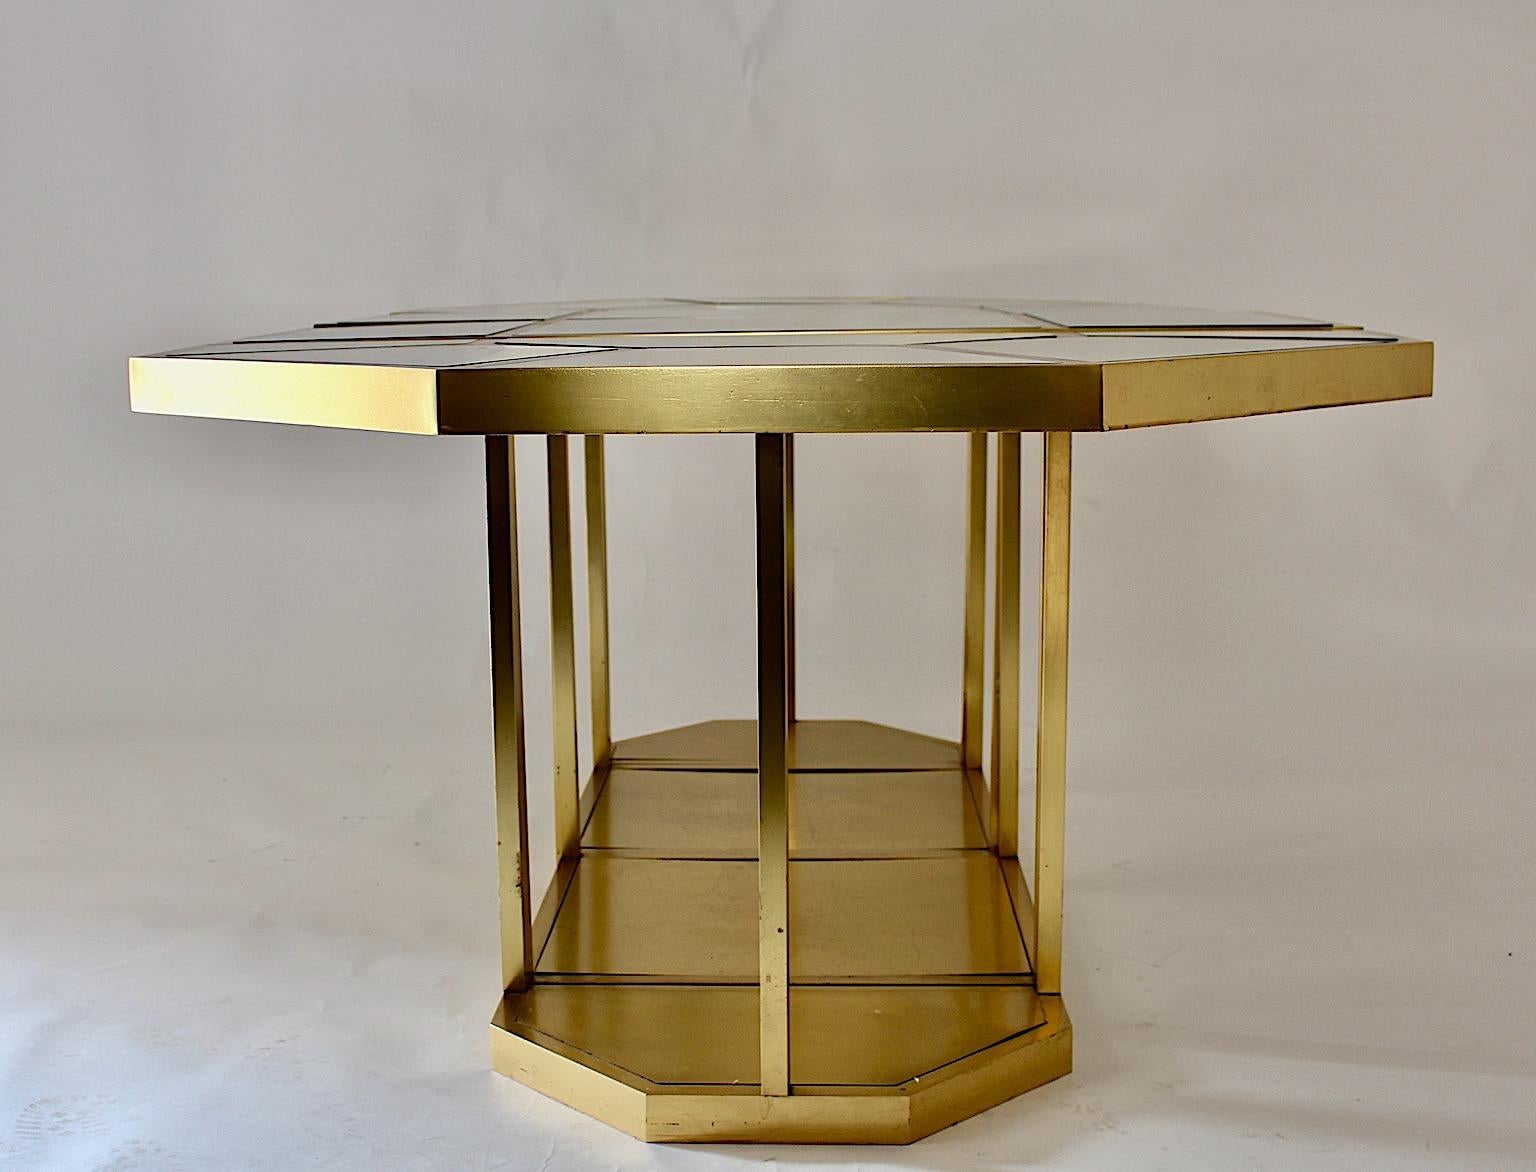 Modernist Vintage Brass Dining Table attributed to Gabriella Crespi Italy 1970s For Sale 1